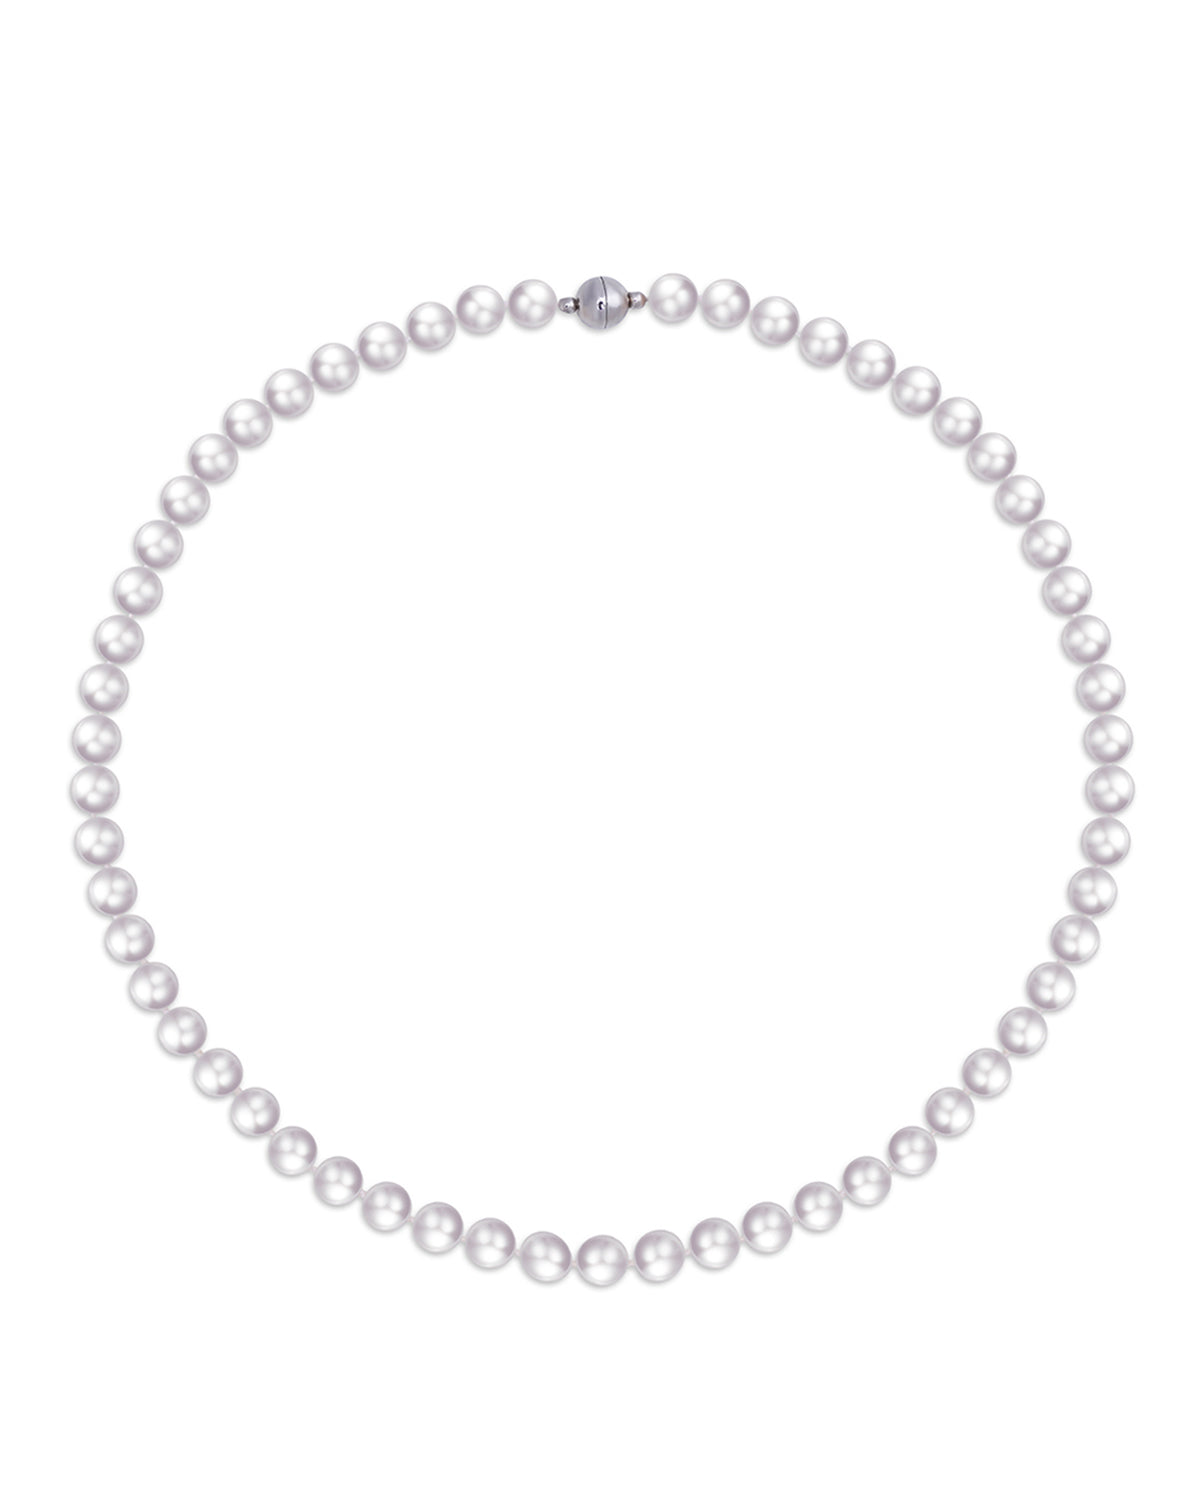 7.5-8.0mm Japanese Akoya White Pearl Necklace- AAA Quality - Preala Jewels #